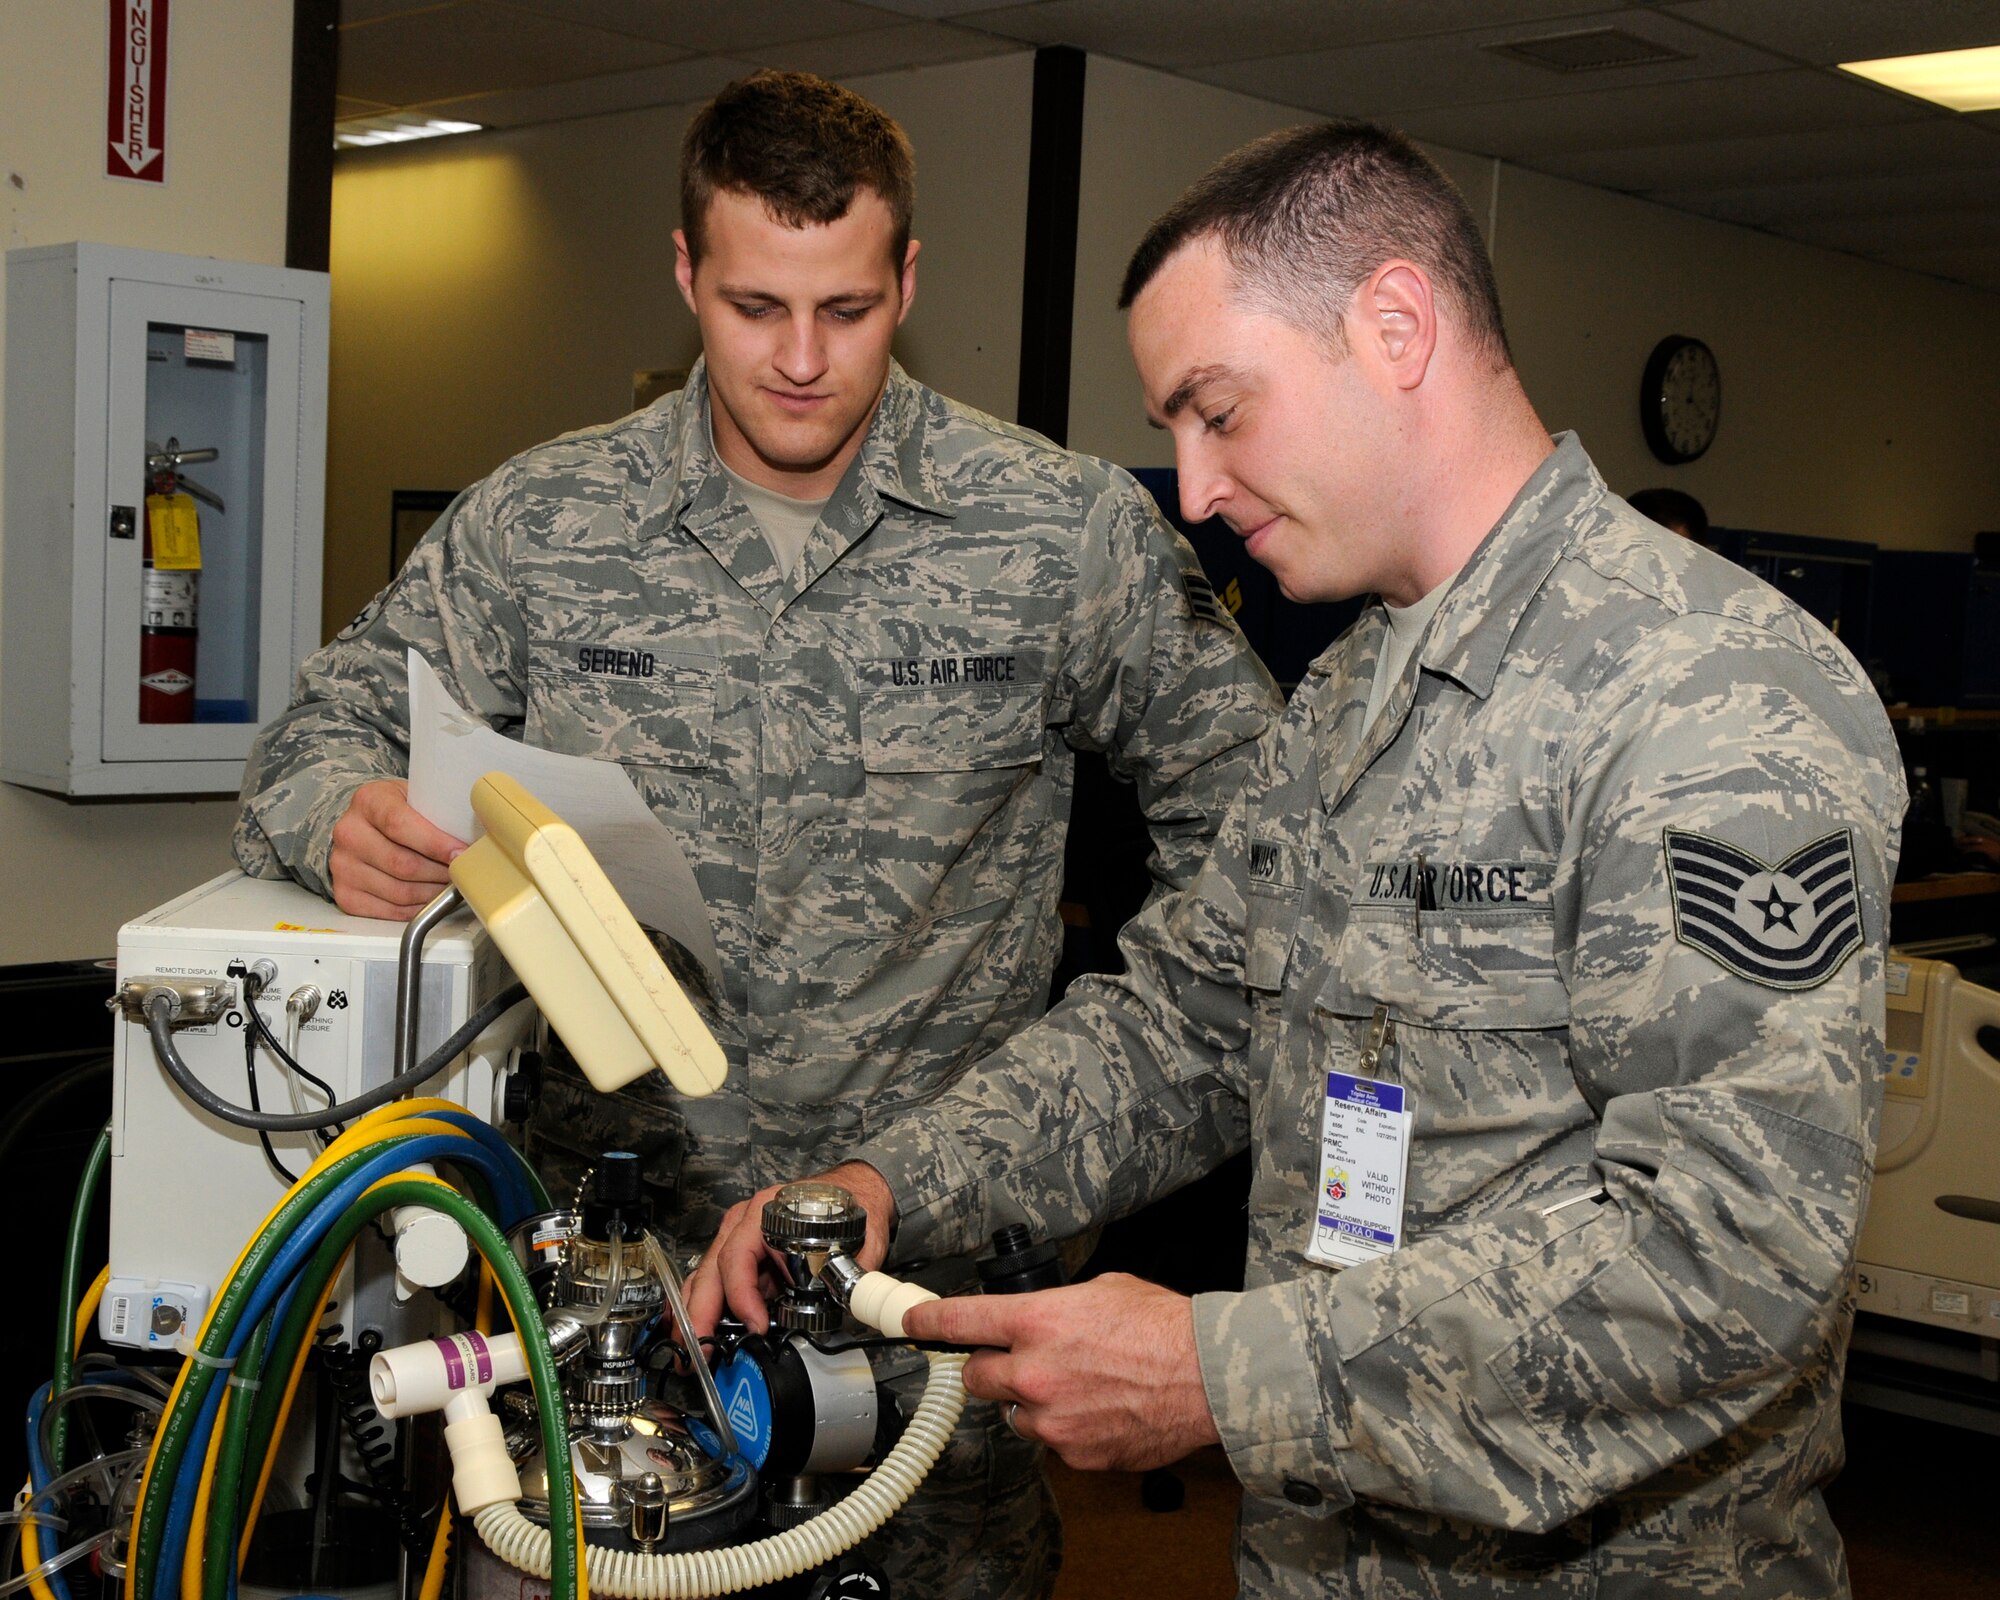 Senior Airman Timothy Sereno (left) and Tech. Sgt. Mark Dinnius, biomedical equipment technicians with the 182nd Medical Group,  inspect an anesthesia machine at Tripler Army Medical Center, Hawaii, September 10, 2014. They are from a group of 43 MDG members participating in overseas annual training September 6-20, 2014.  (U.S. Air National Guard photo by Tech. Sgt. Todd Pendleton) (Released)
